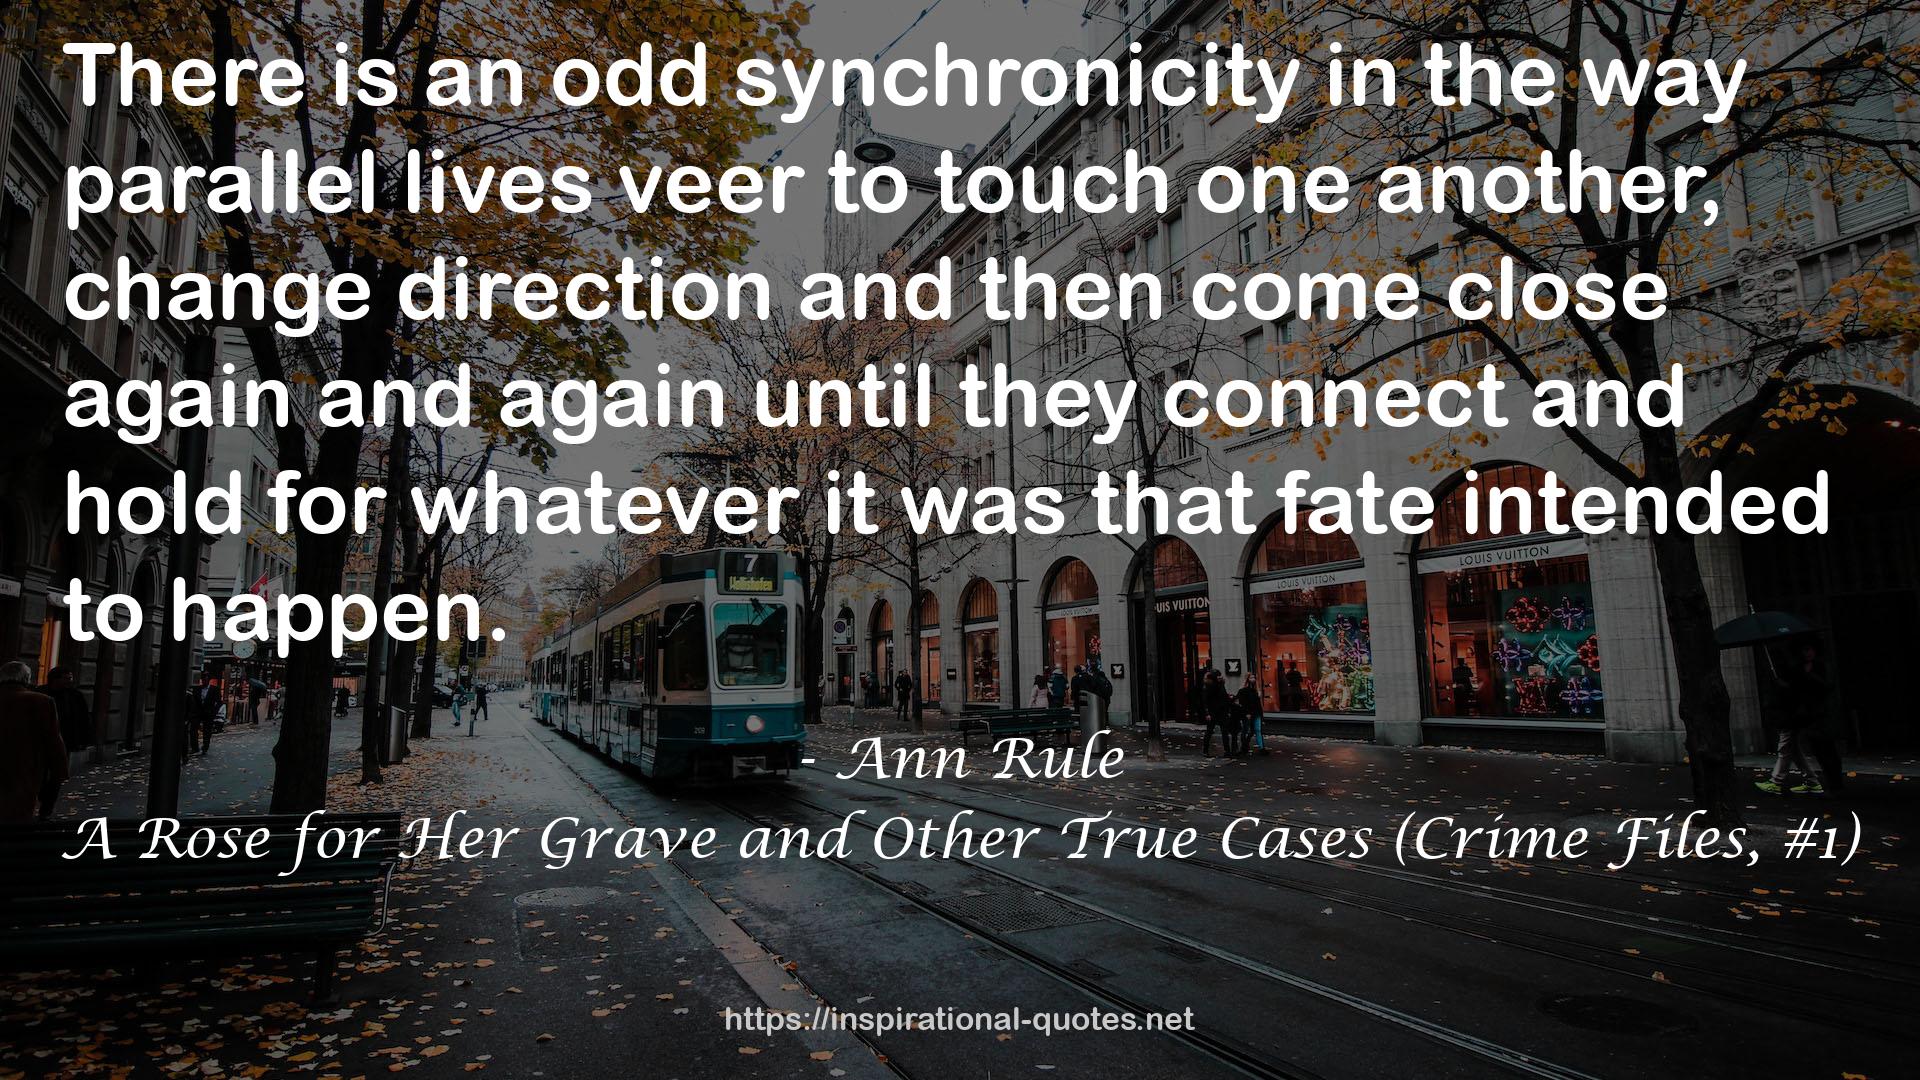 A Rose for Her Grave and Other True Cases (Crime Files, #1) QUOTES